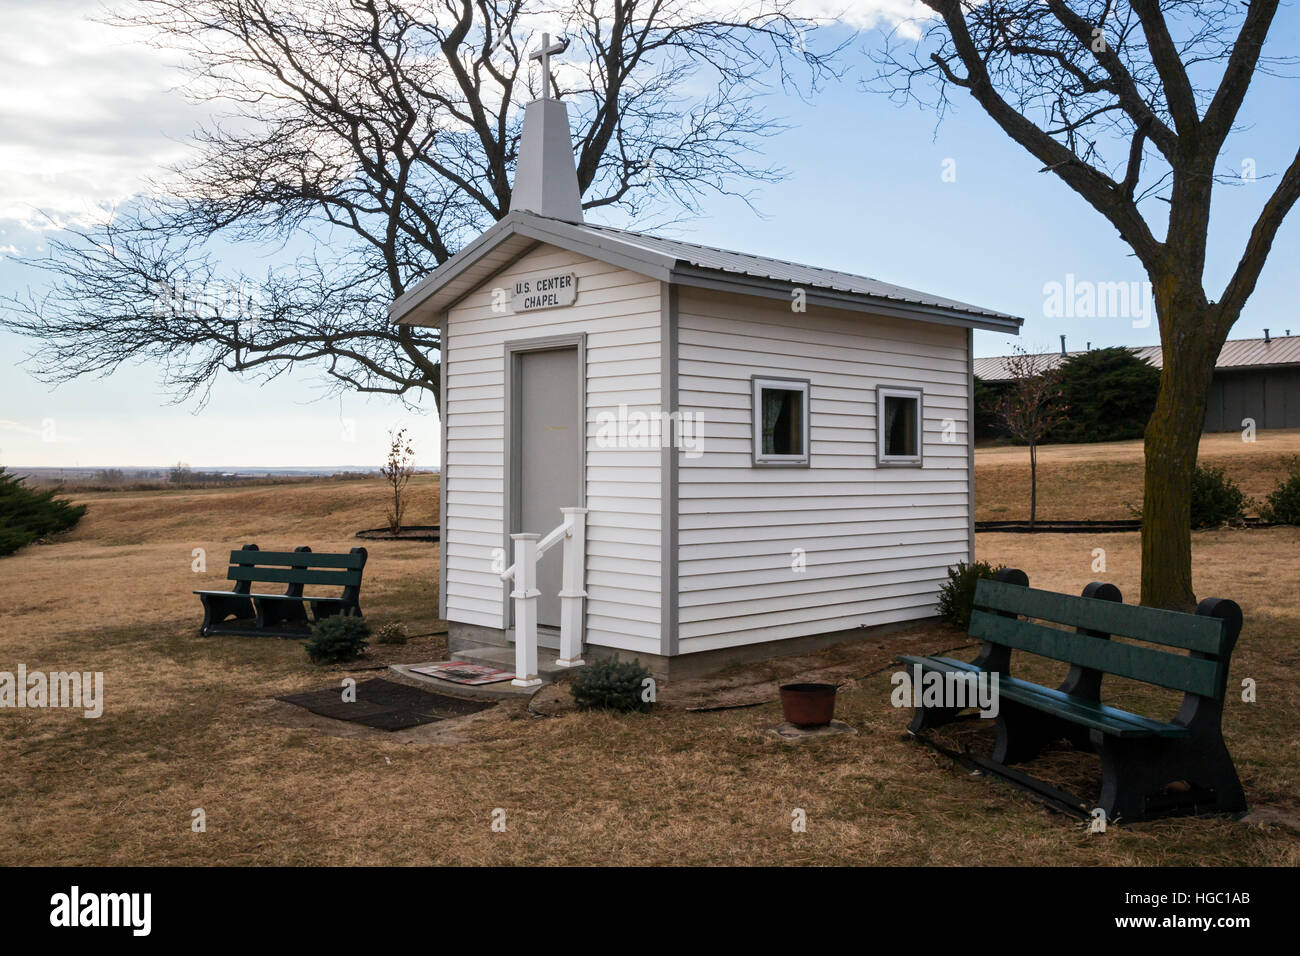 Lebanon, Kansas - A small chapel at the geographical center of the 48 contiguous U.S. states. Stock Photo